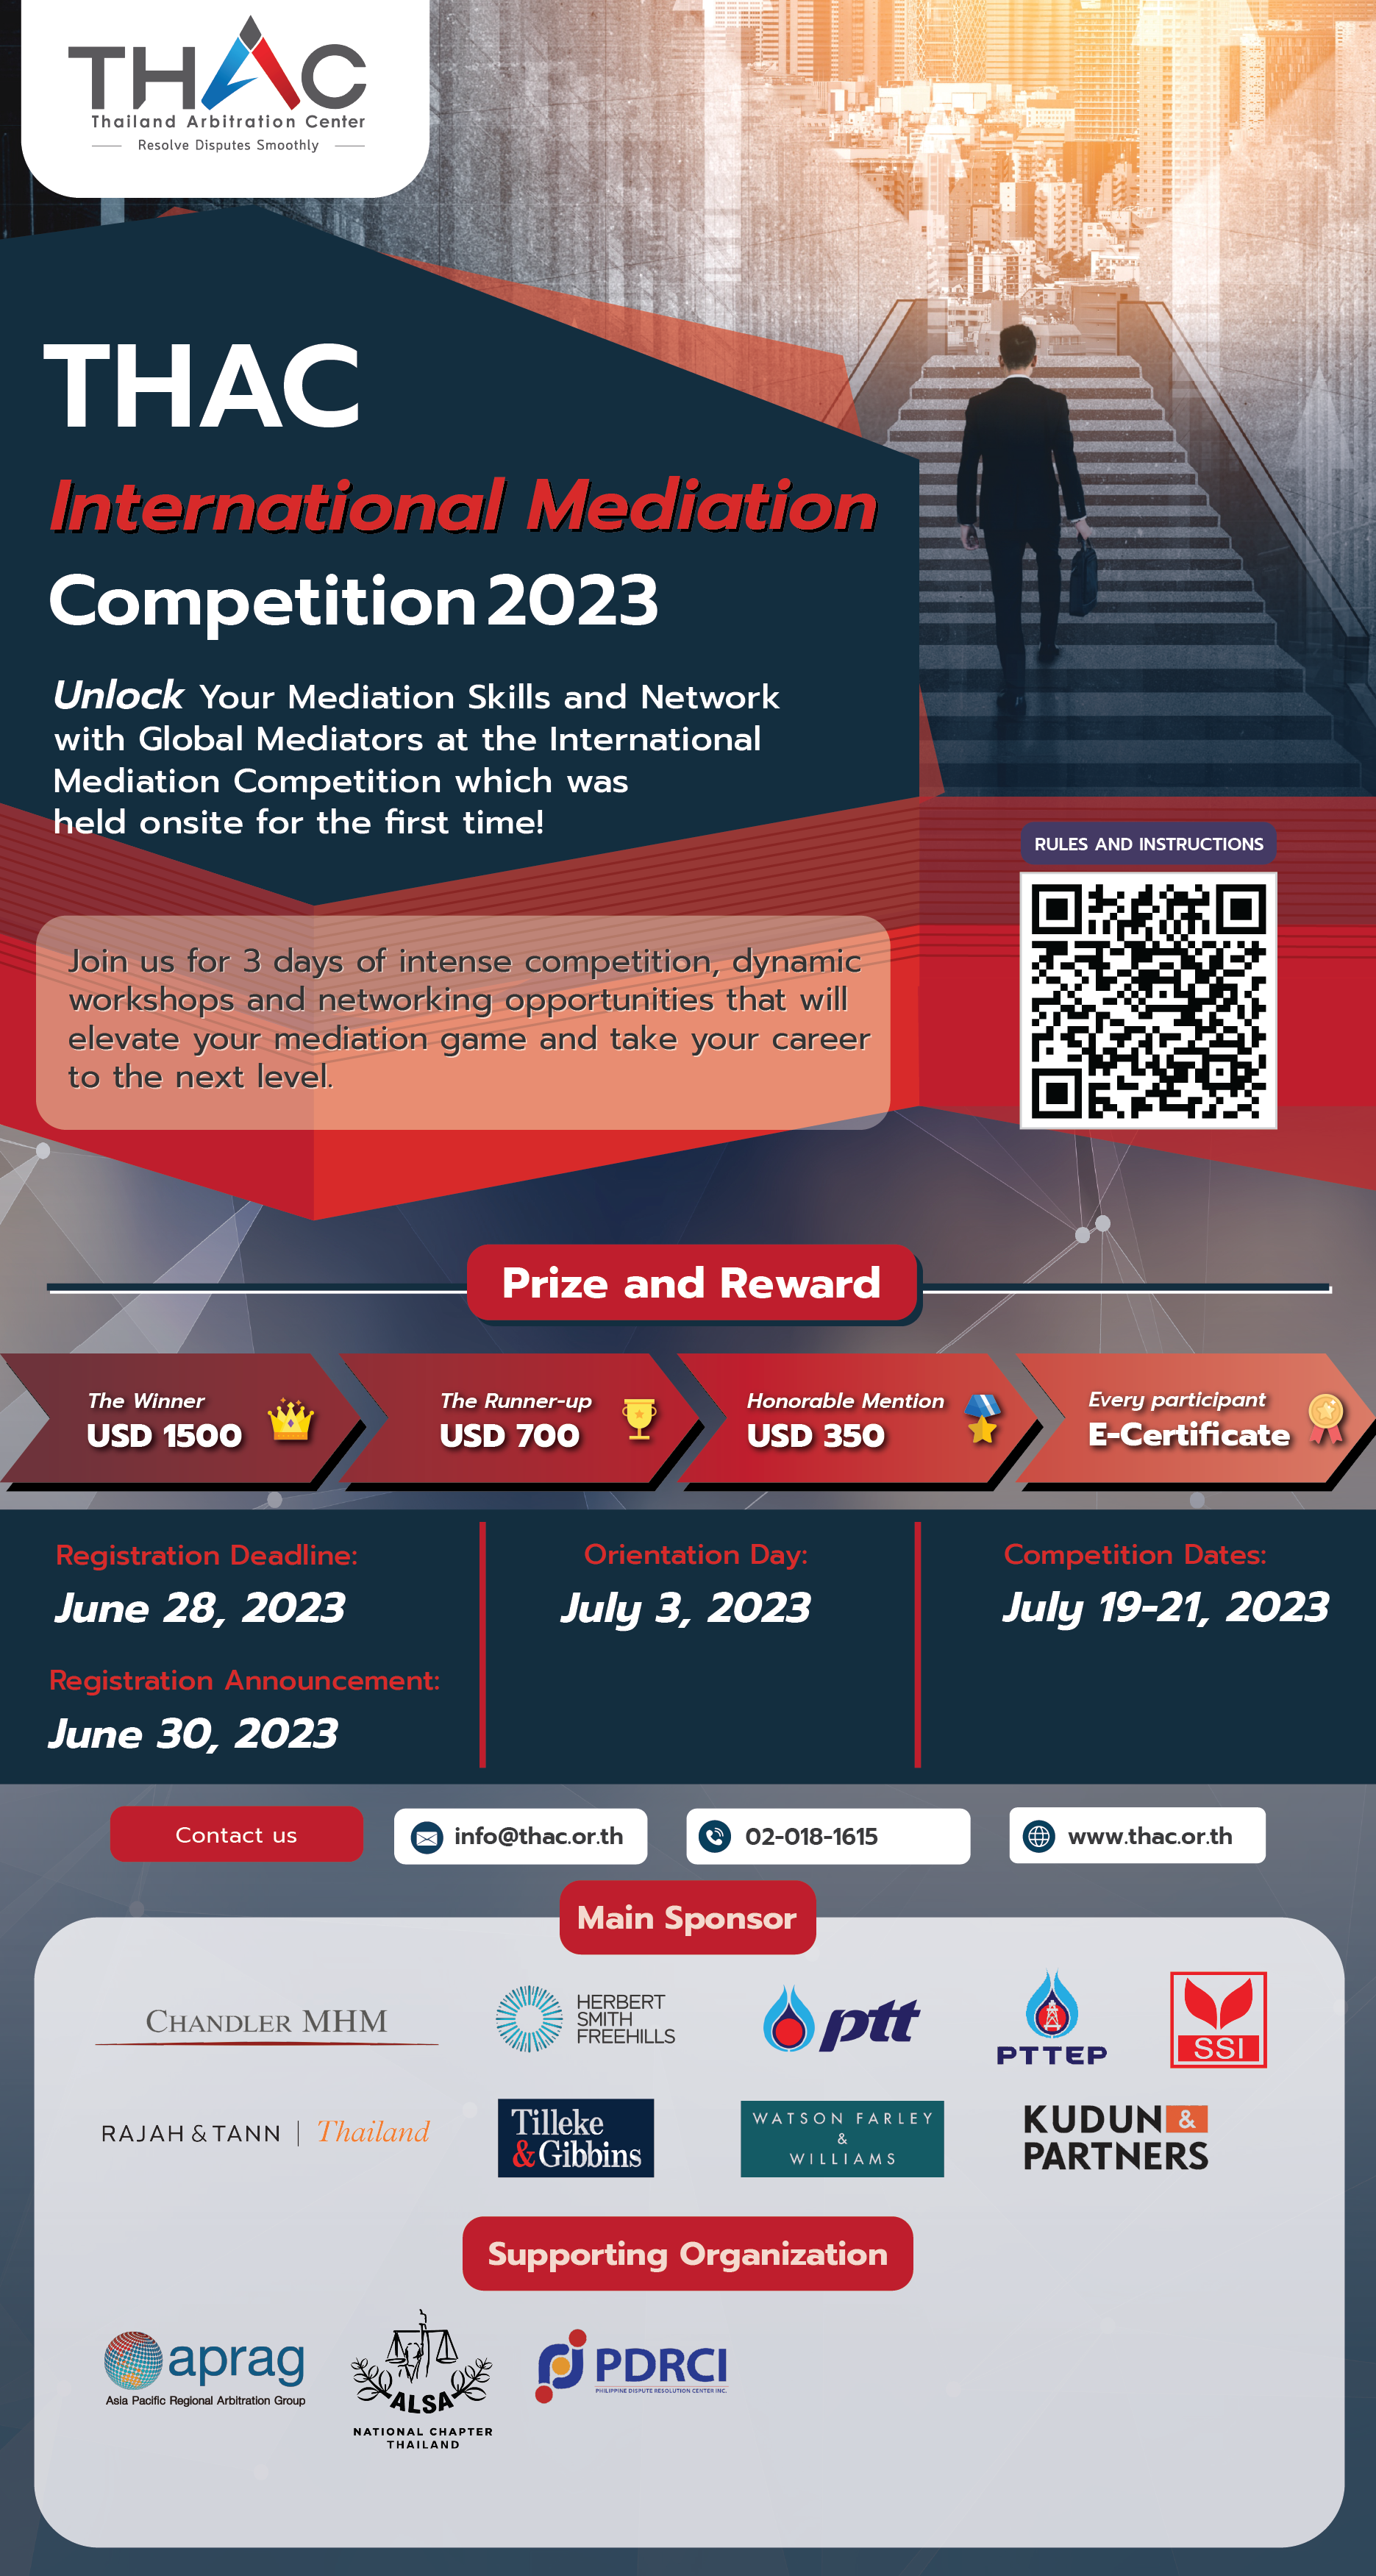 THAC International Mediation Competition 2023